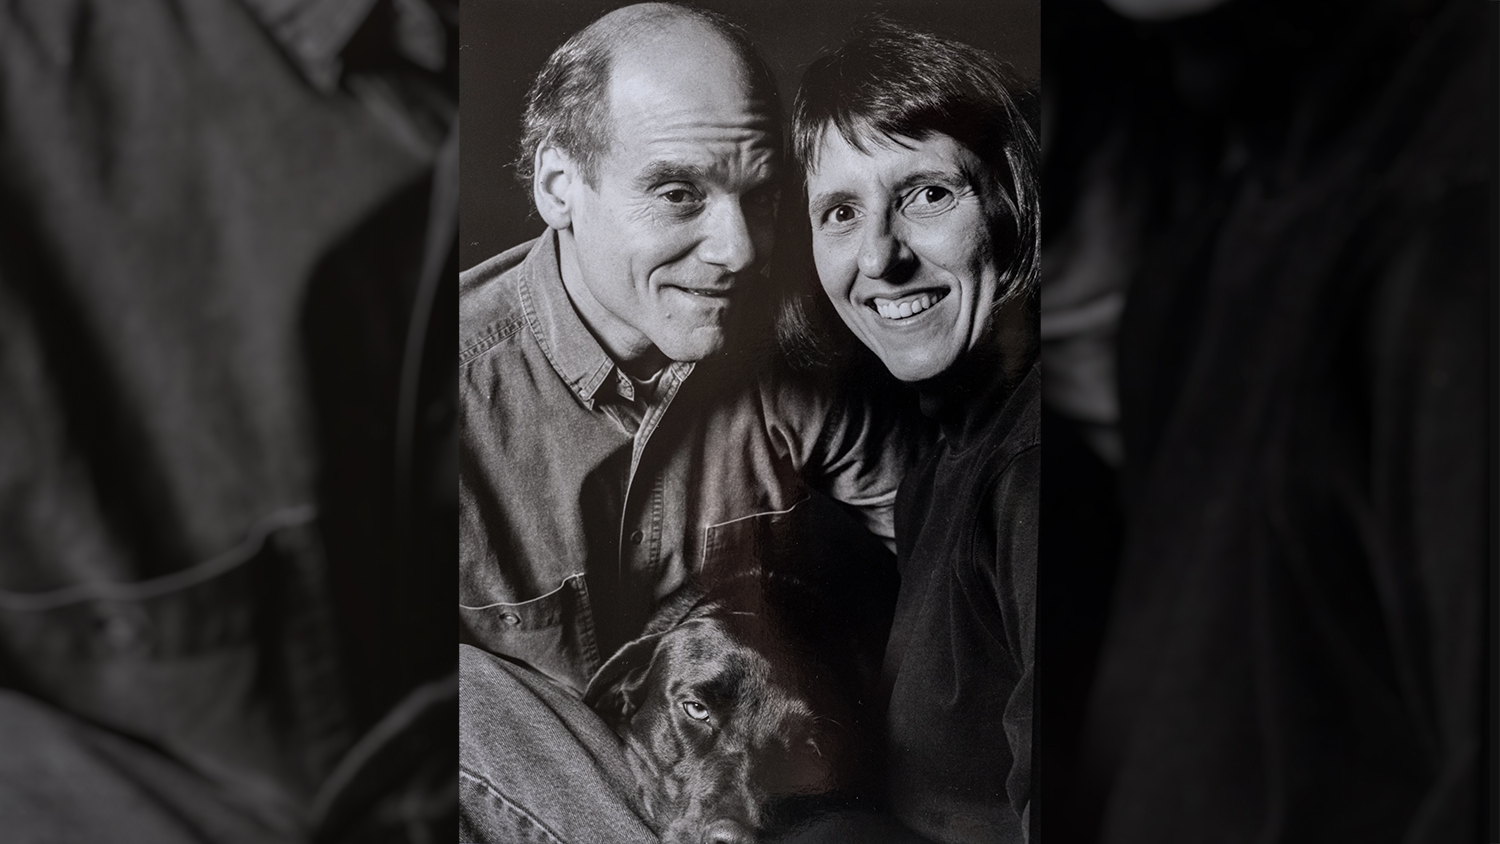 Susan Toplikar with her husband, Mike Cindric in 1996. Photo courtesy Design Dimension.